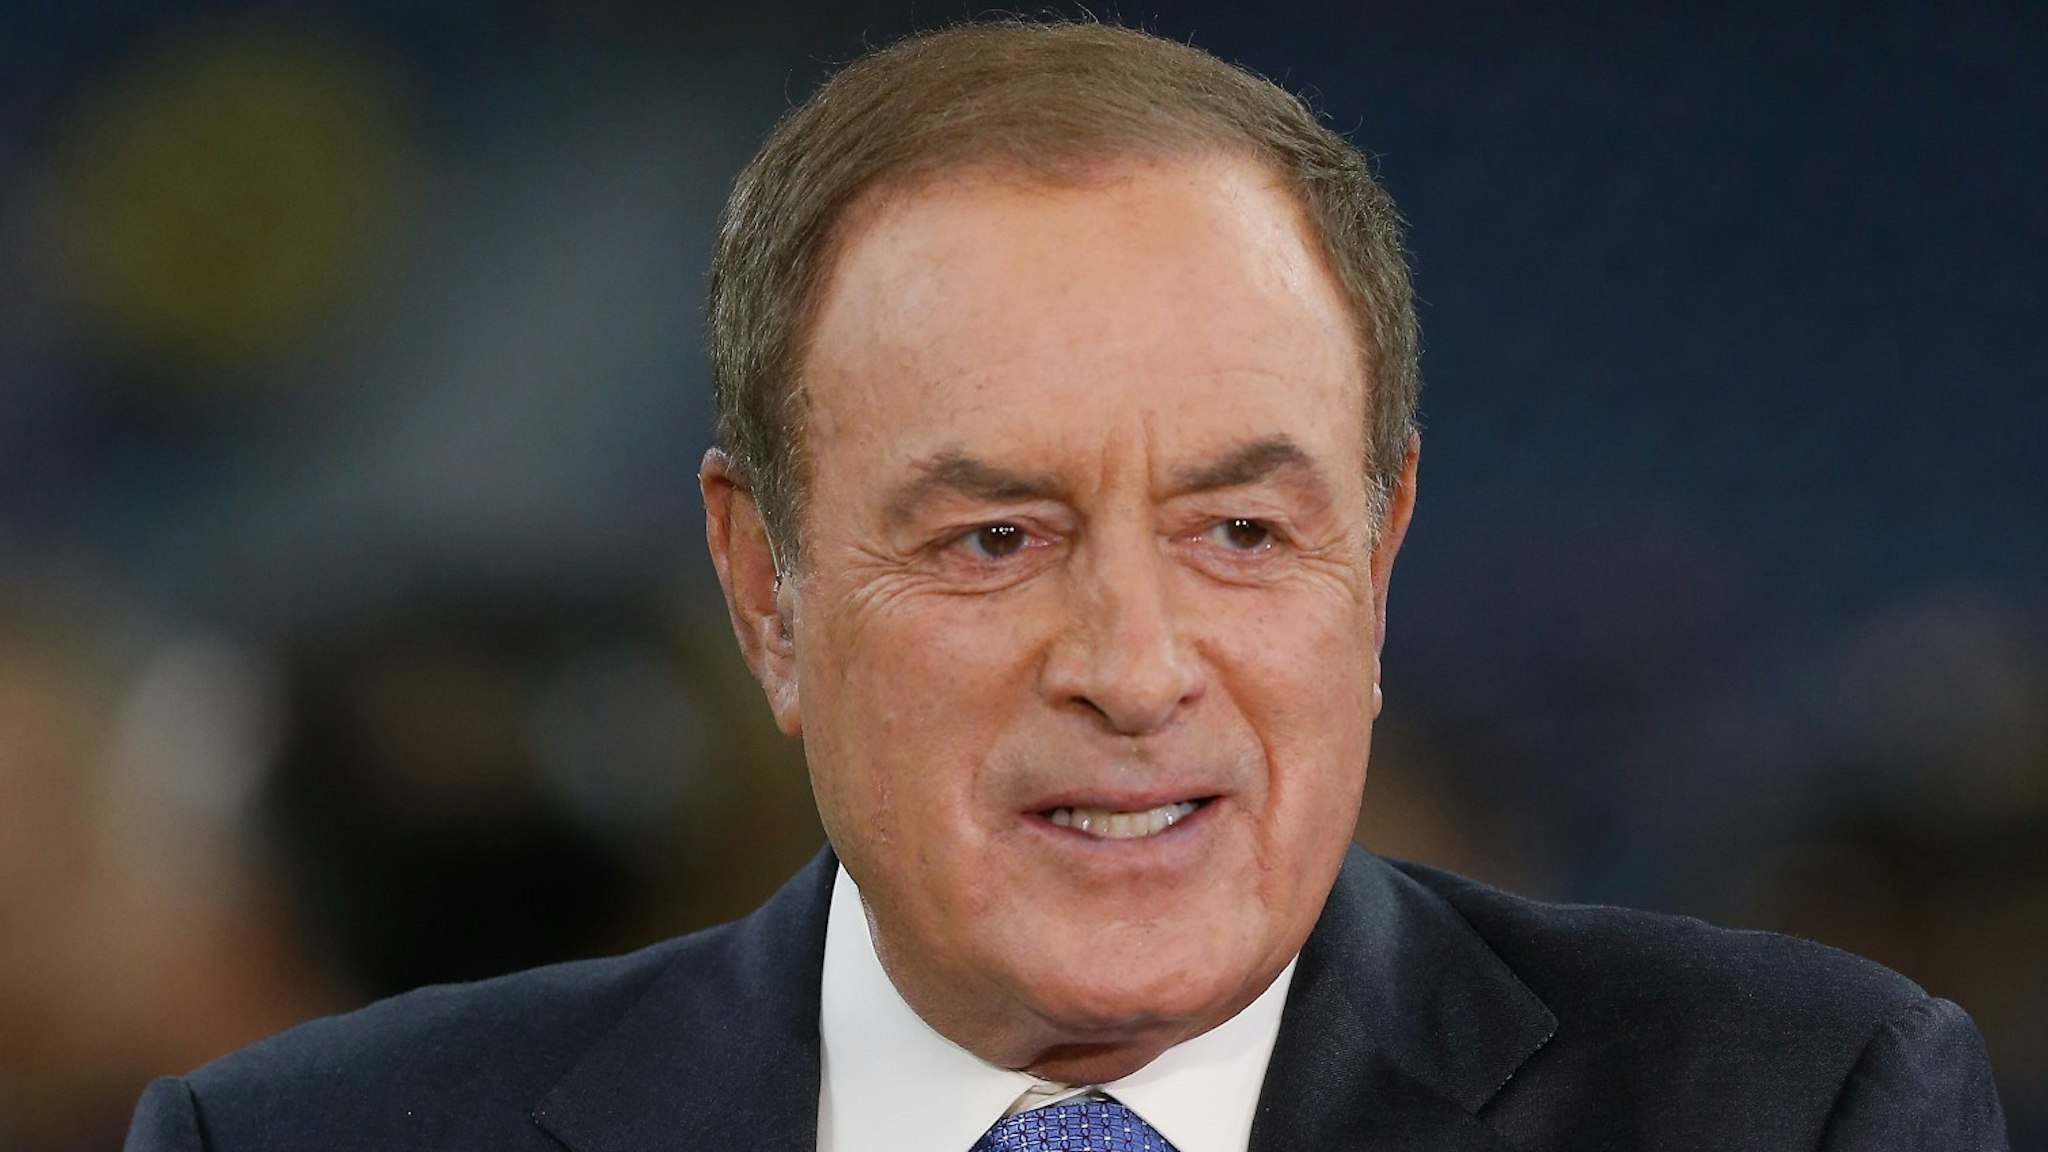 NBC Sunday Night Football television personality Al Michaels at NRG Stadium on October 7, 2018 in Houston, Texas. Houston won 19-16 in overtime.